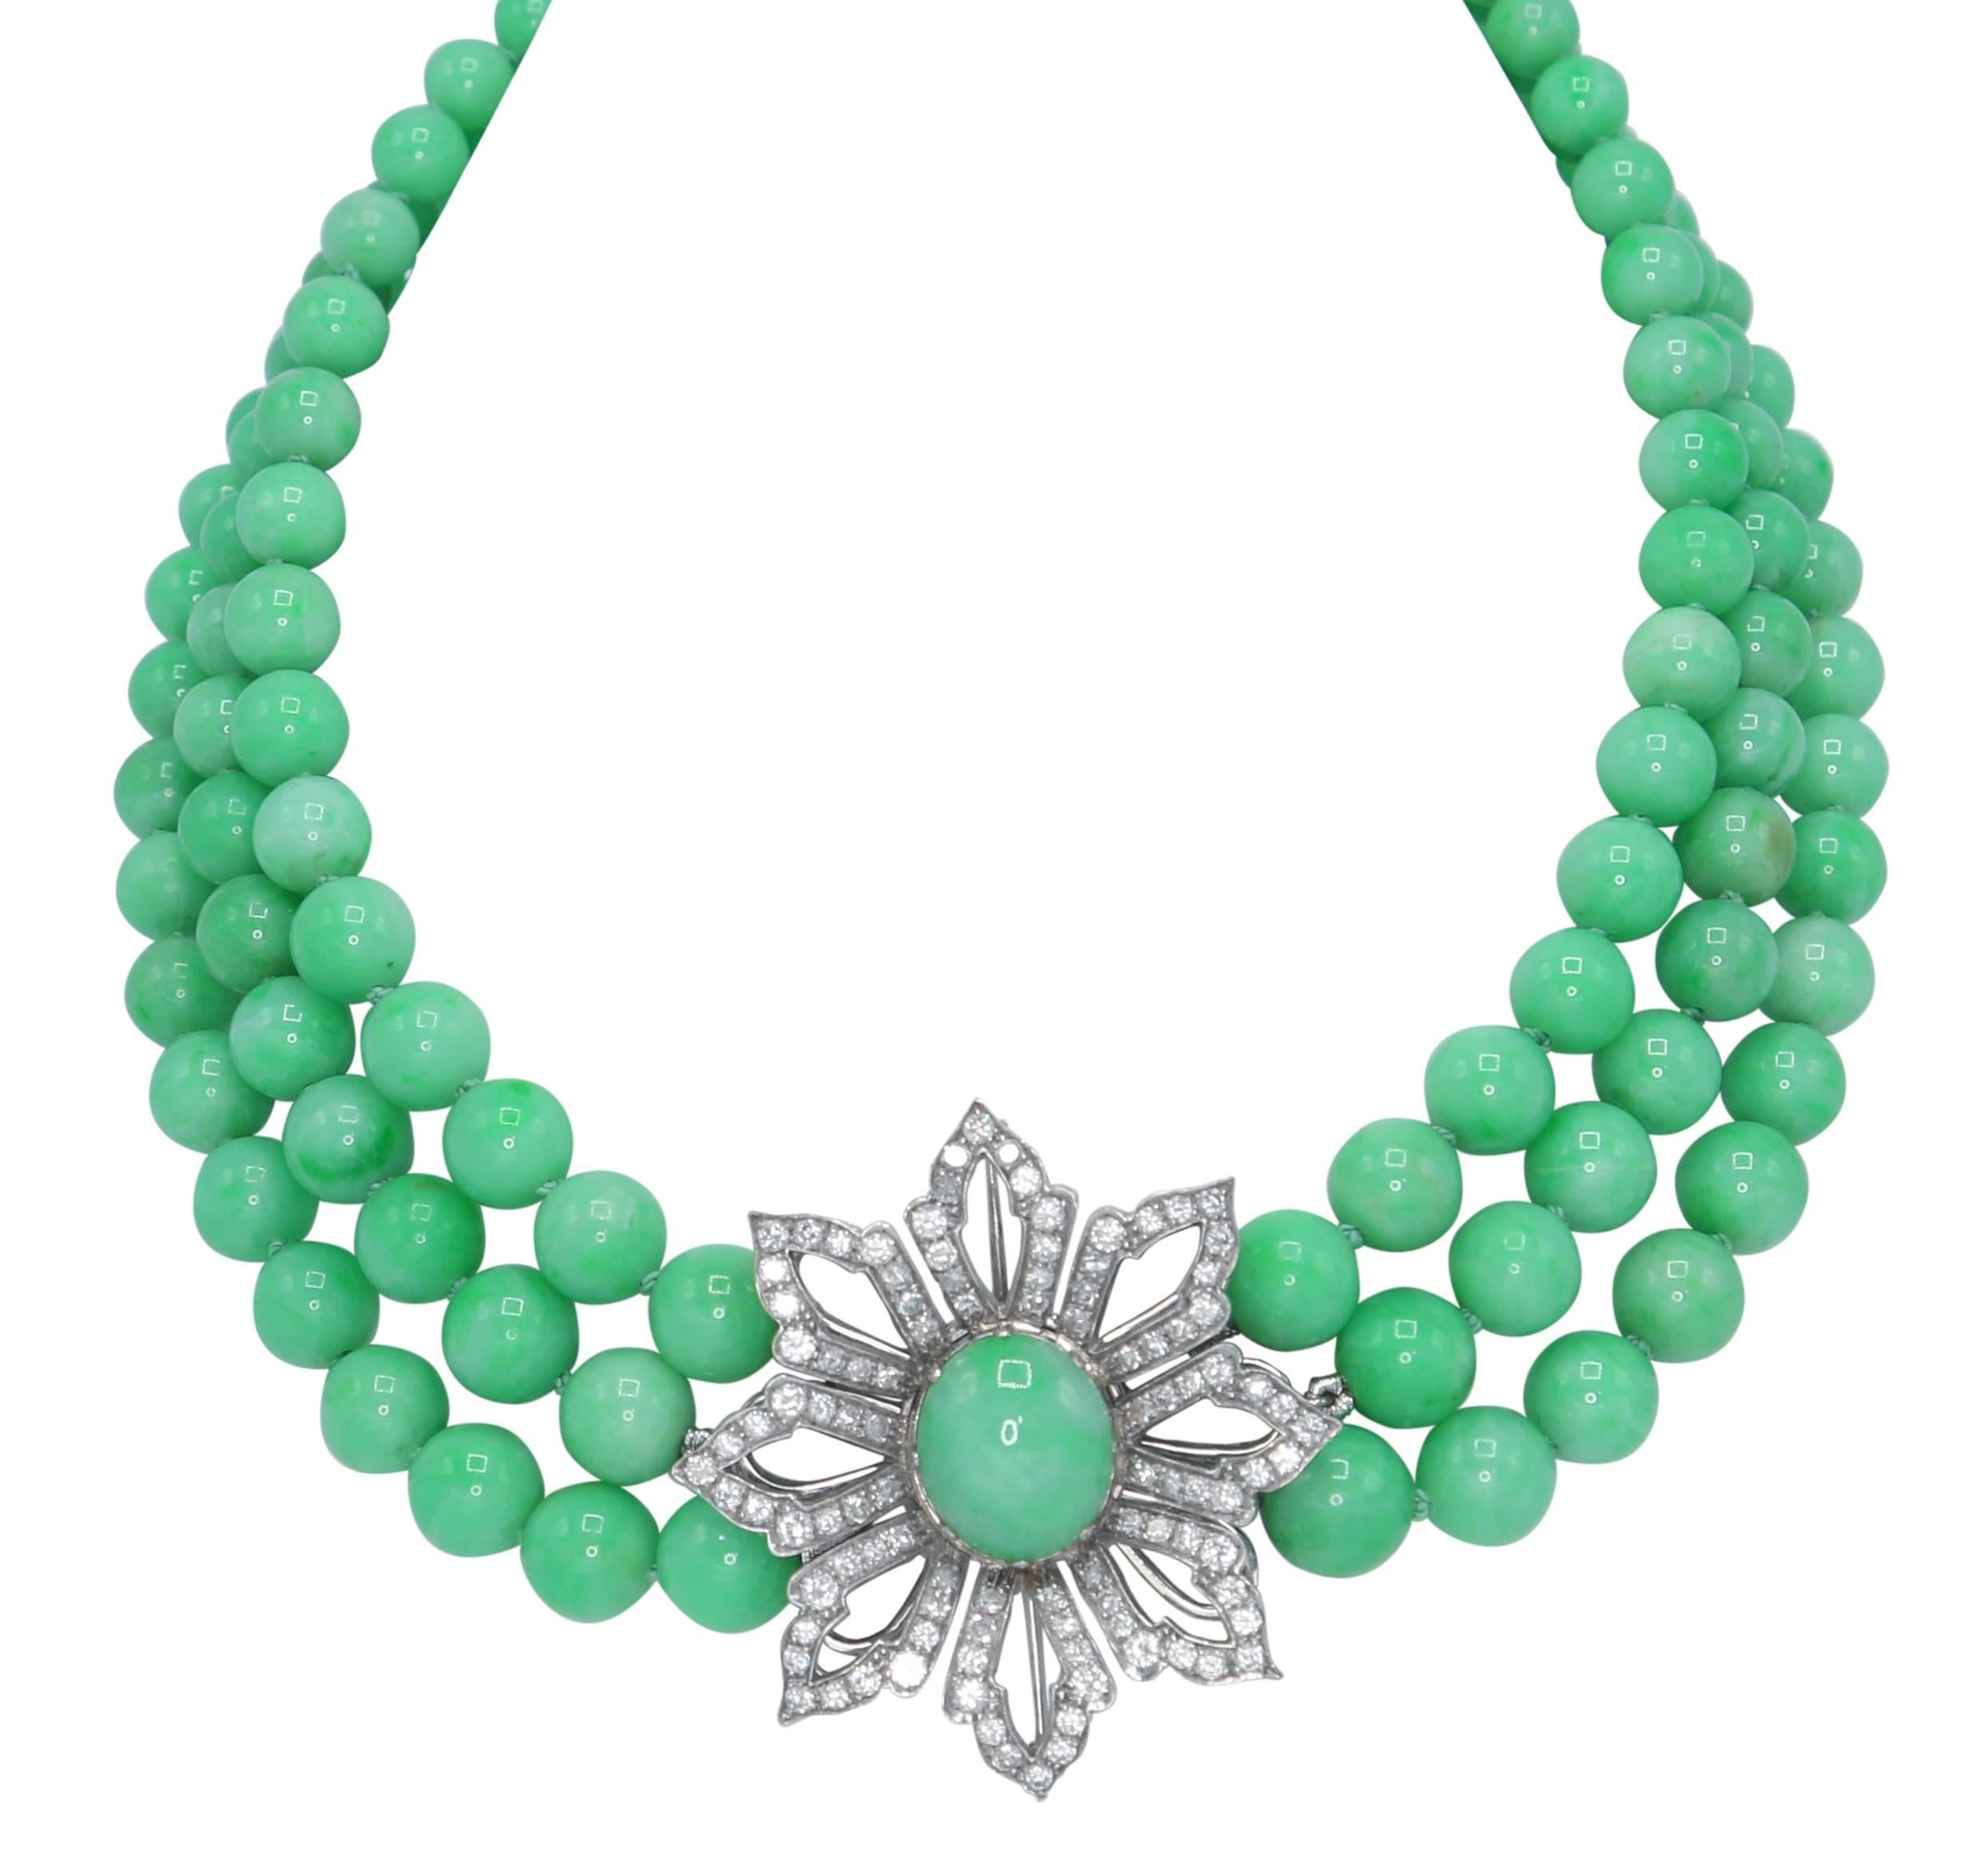 A graduated natural jadeite and diamond necklace composed of three strands of jadeite measuring 5.5 to 10.2 mm., the detachable clasp designed as a flowerhead set in the center with a cabochon jadeite section, with petals set with round diamonds